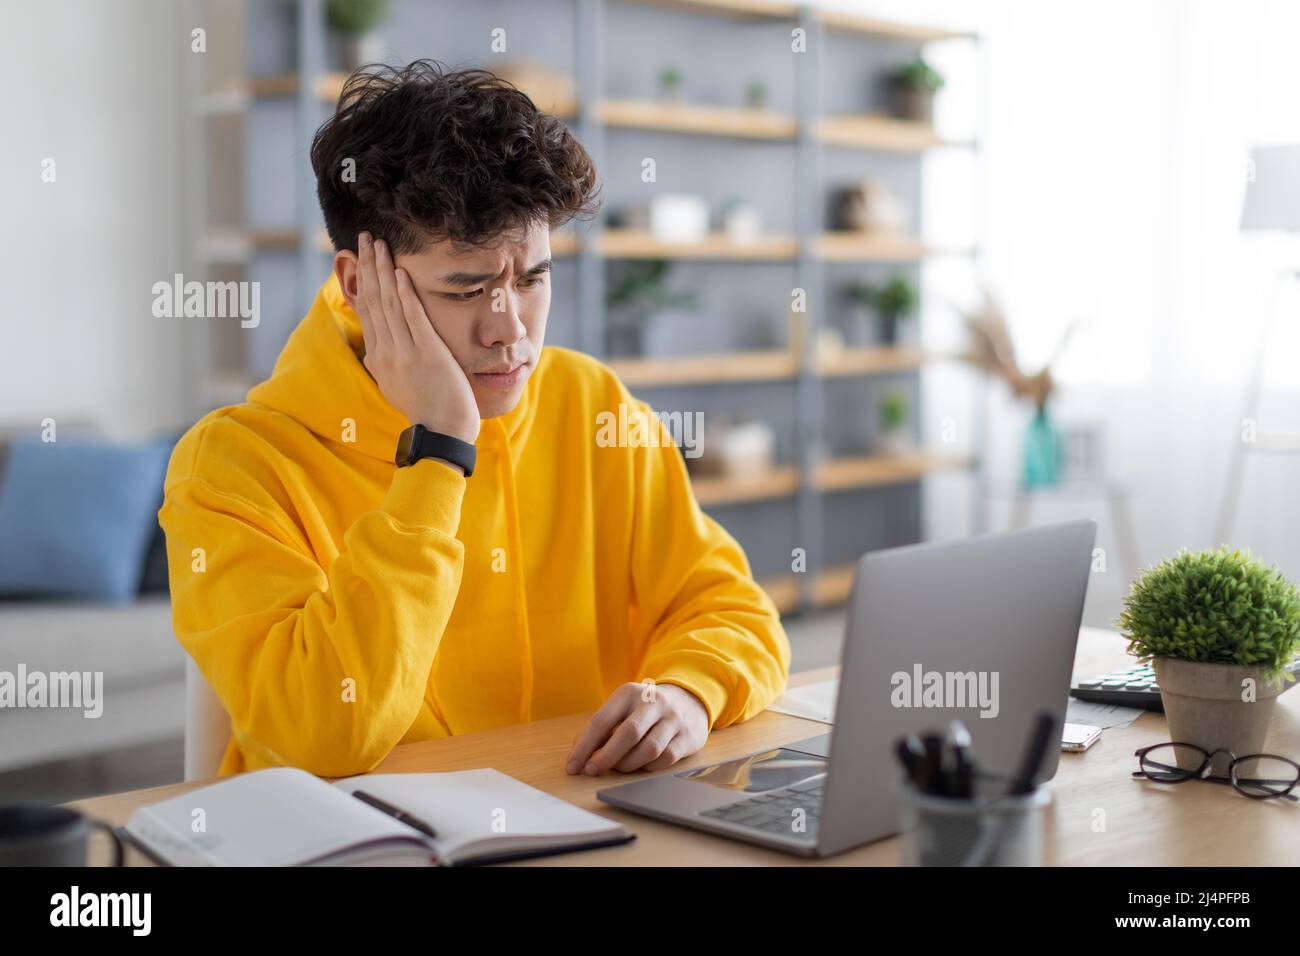 Bored Asian male student sitting at desk with pc Stock Photo